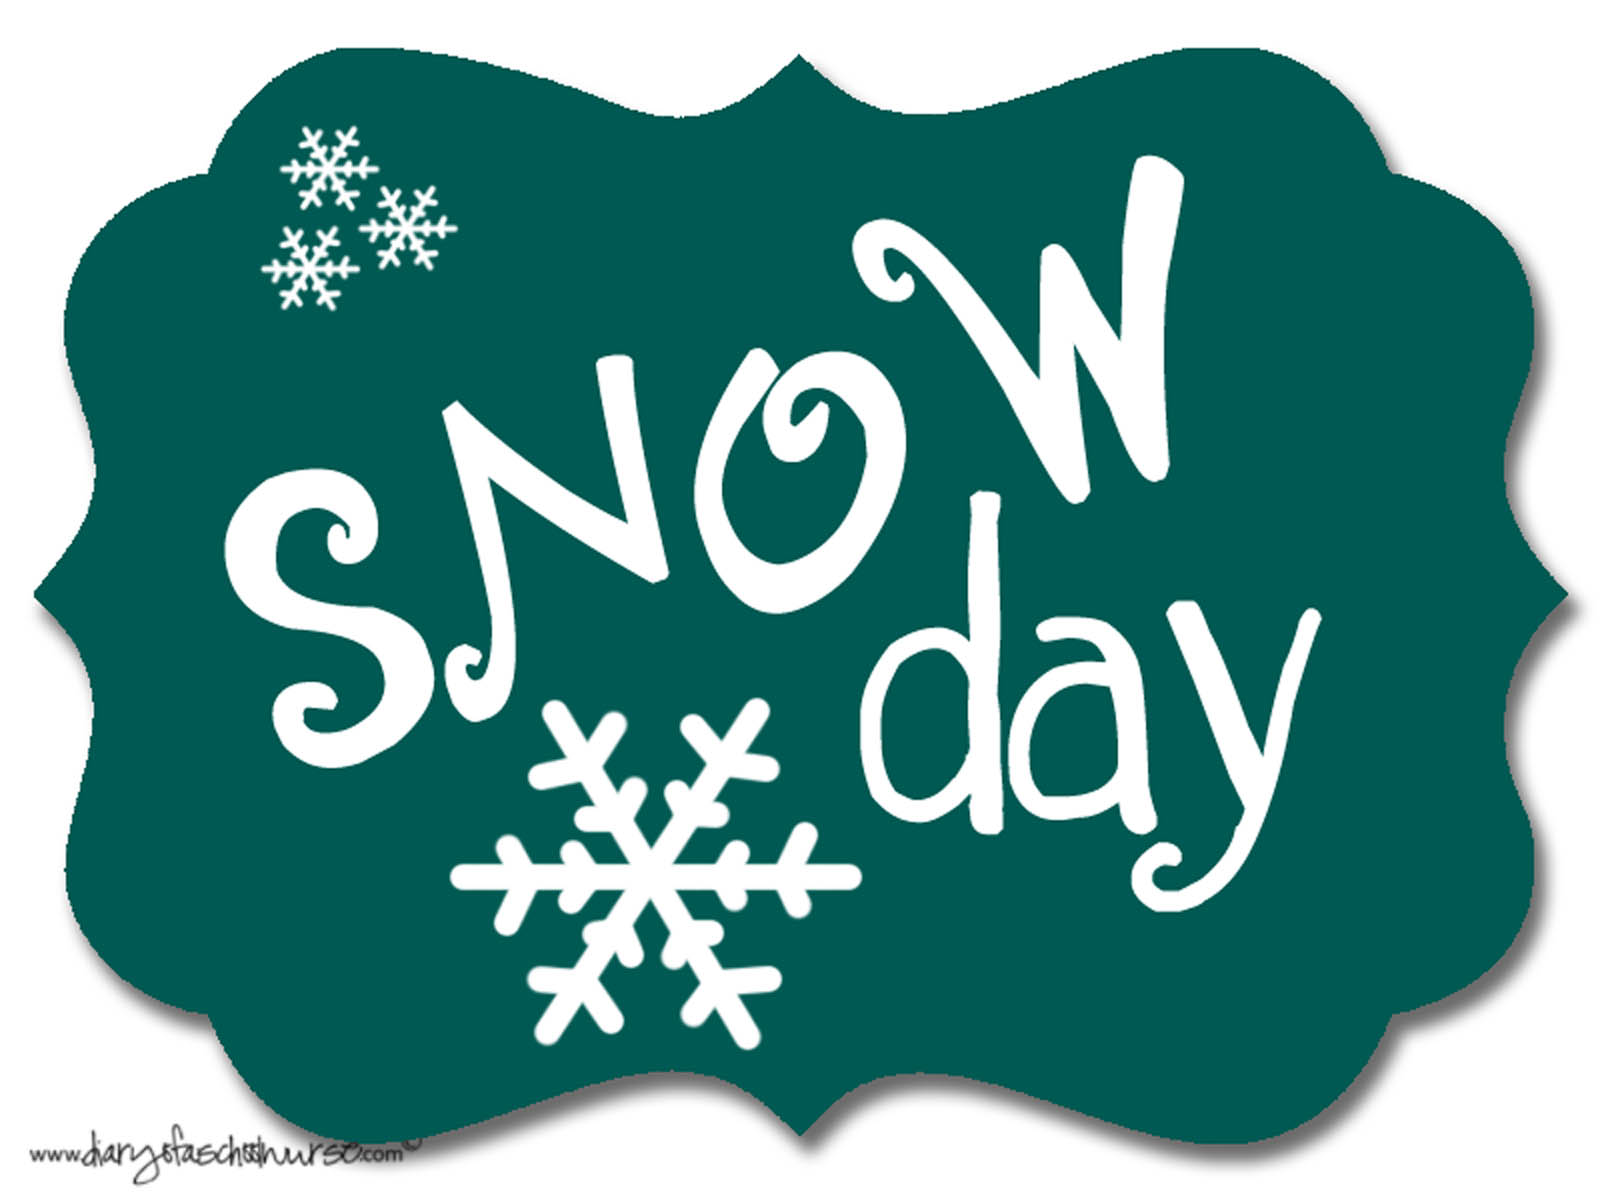     Closed Today School Issues Faq On Makeup Days   The Princeton Sun